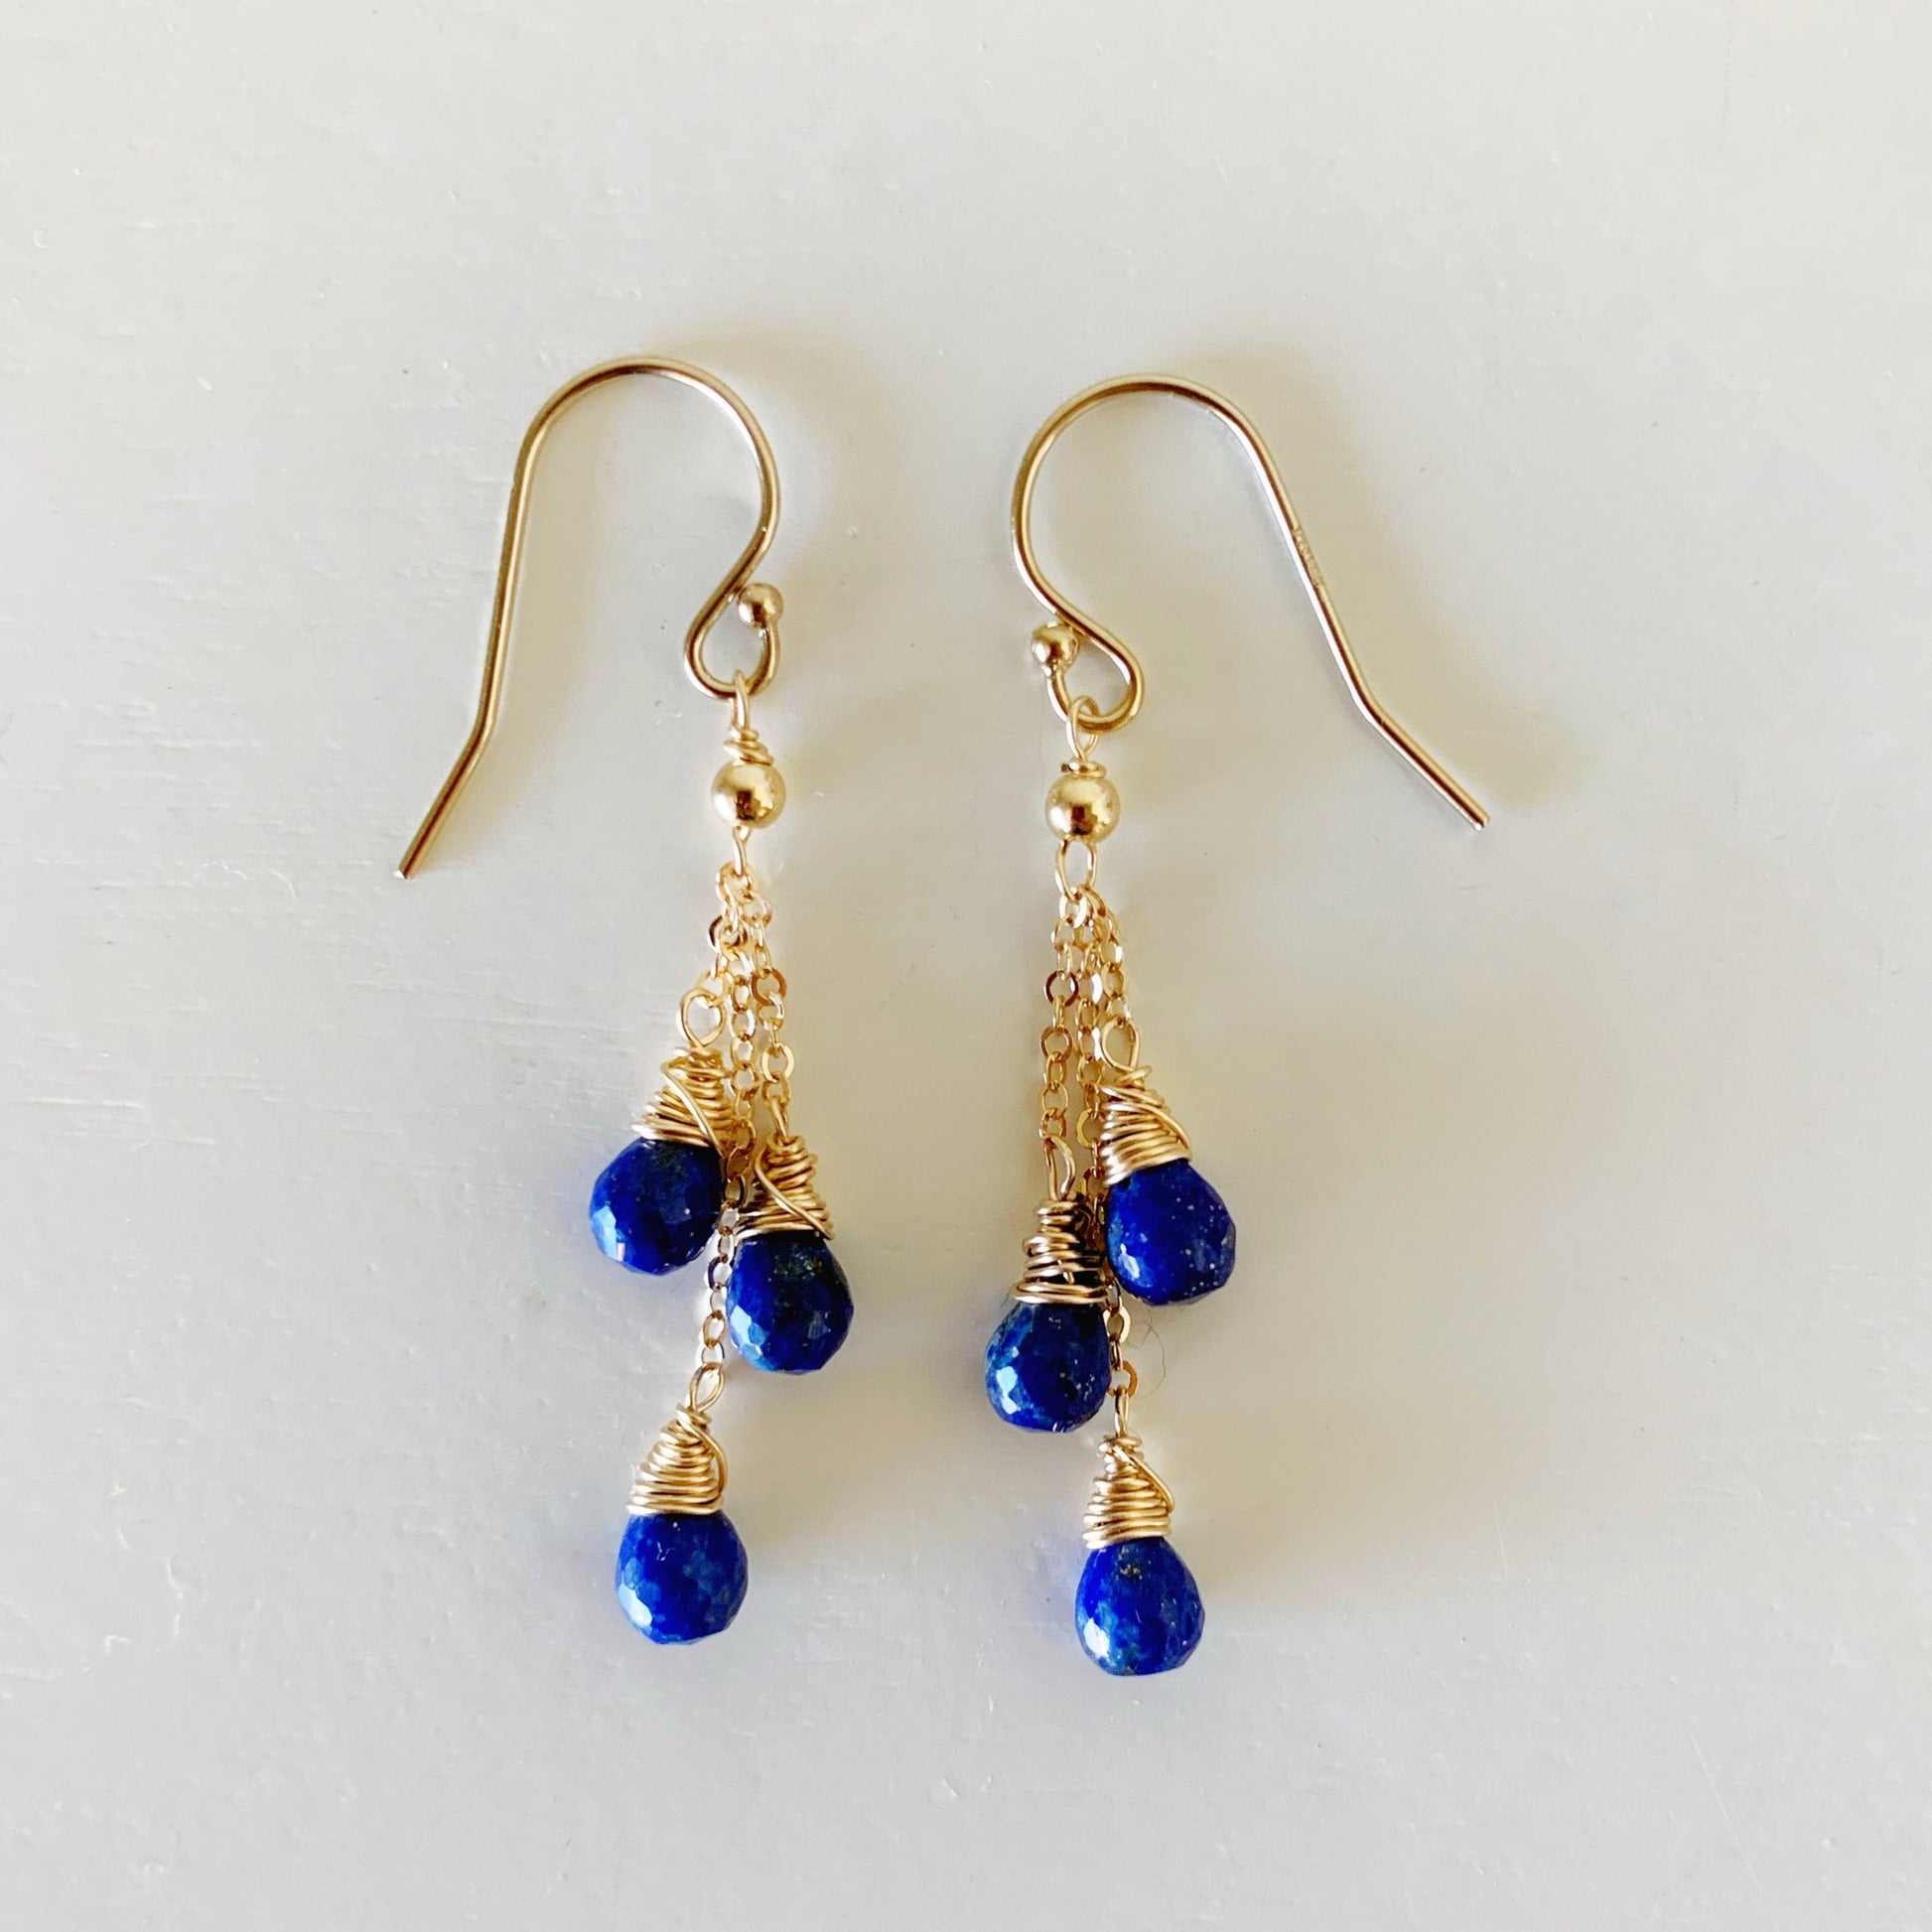 the mermaids and madeleines neptune earrings are created with 3 strands of 14k gold filled chain on each hook earring with a lapis teardrop bead wire wrapped at the bottom of each strand. this pair of earrings is photographed flat on a white surface